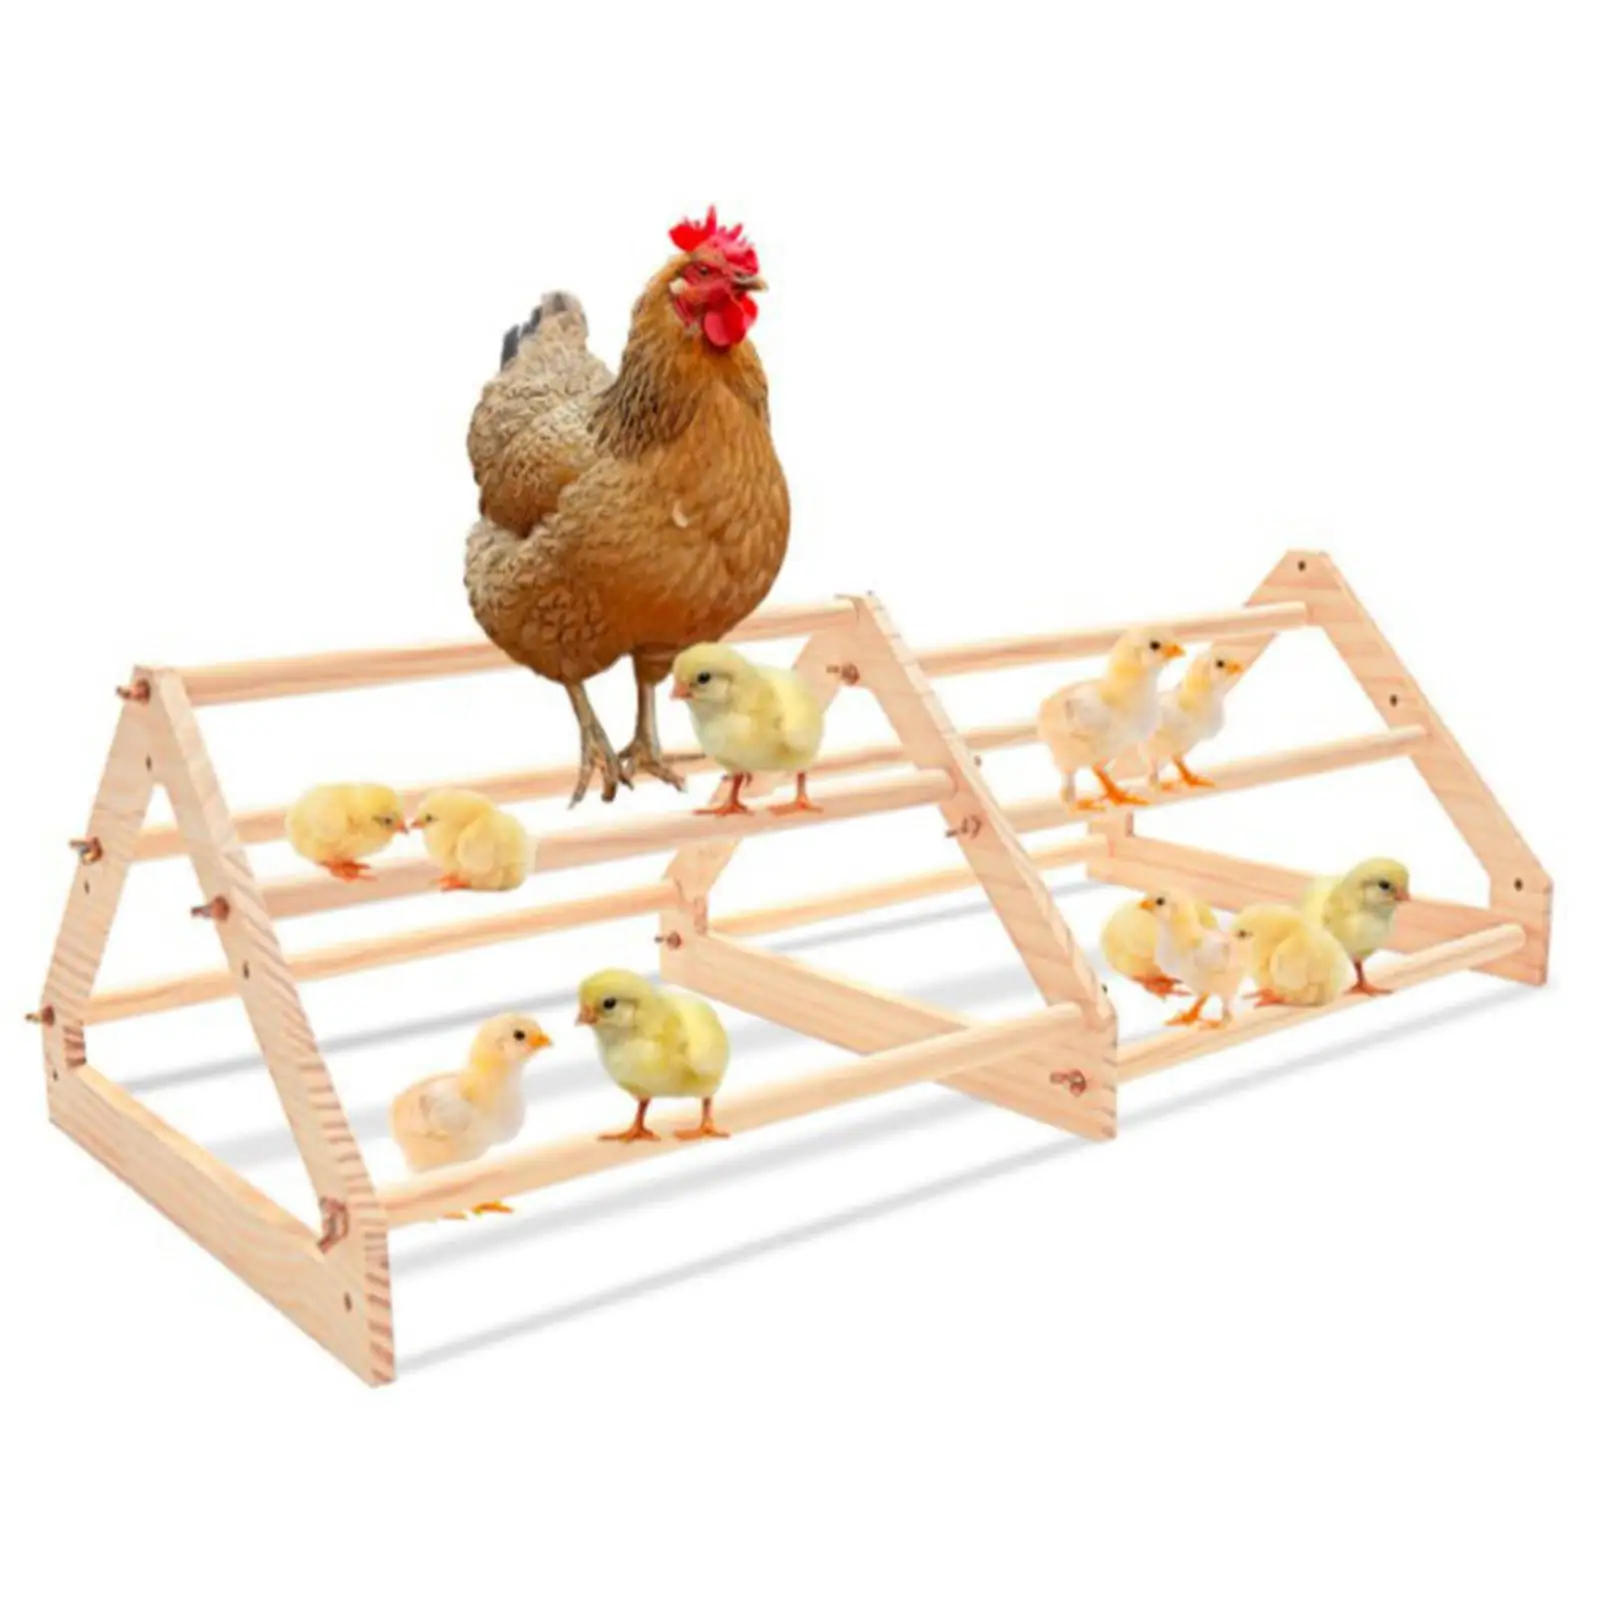 

Wooden Bird Roosting Bar Macaw 3 Tier Chicken Toy Chicks for Hens Parrot Play Stand Training Coop and Brooder Chick Perch